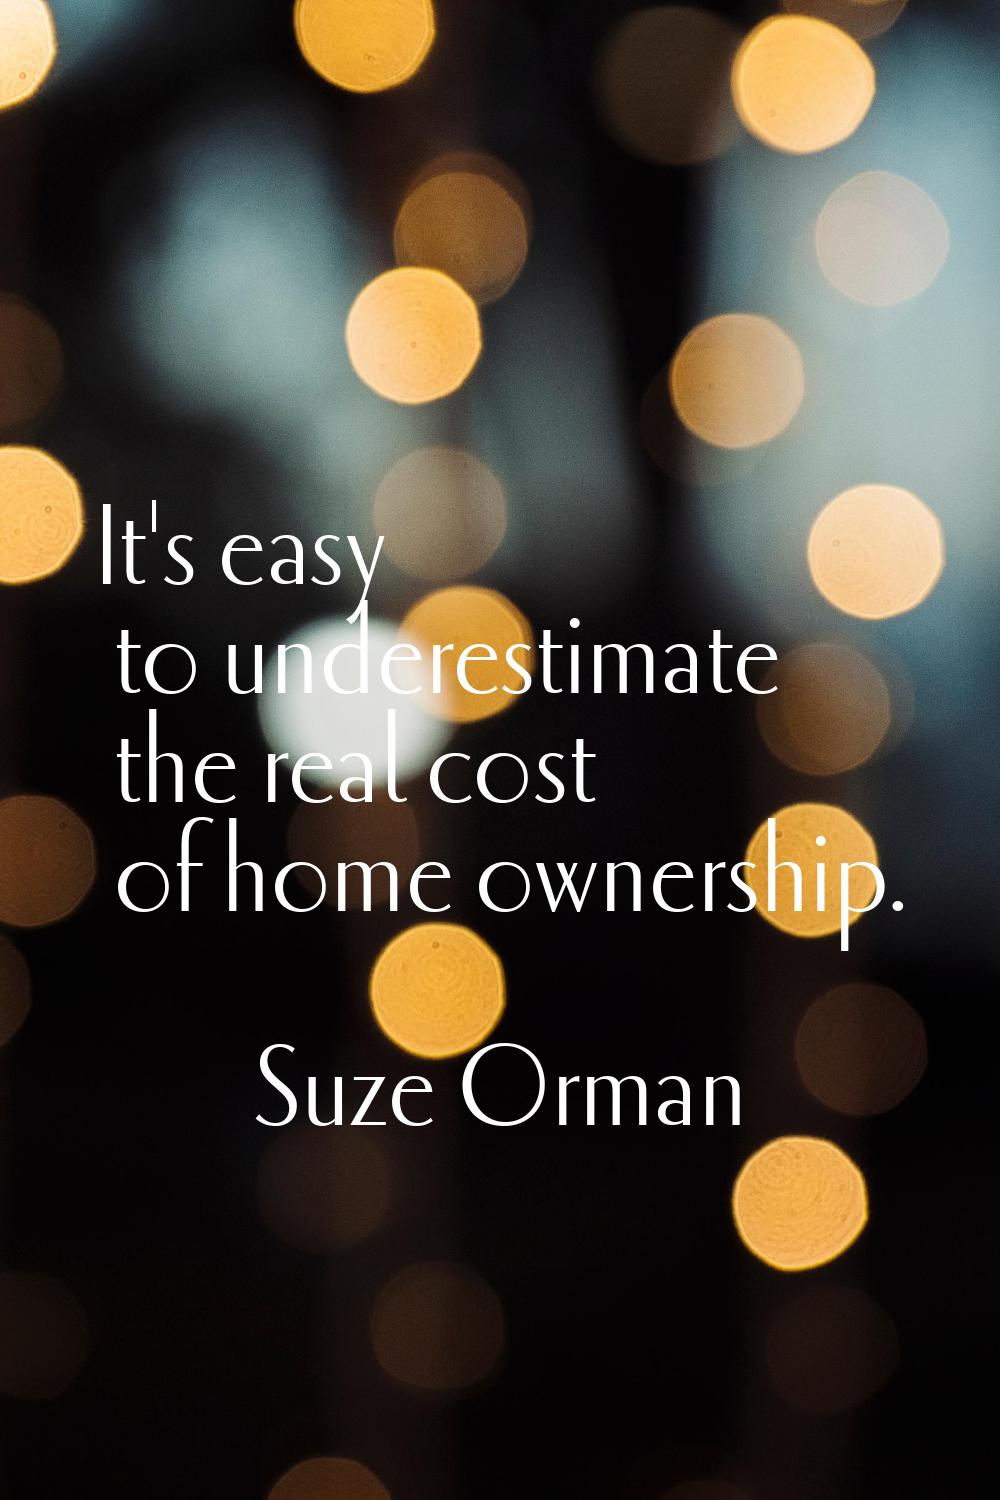 It's easy to underestimate the real cost of home ownership.